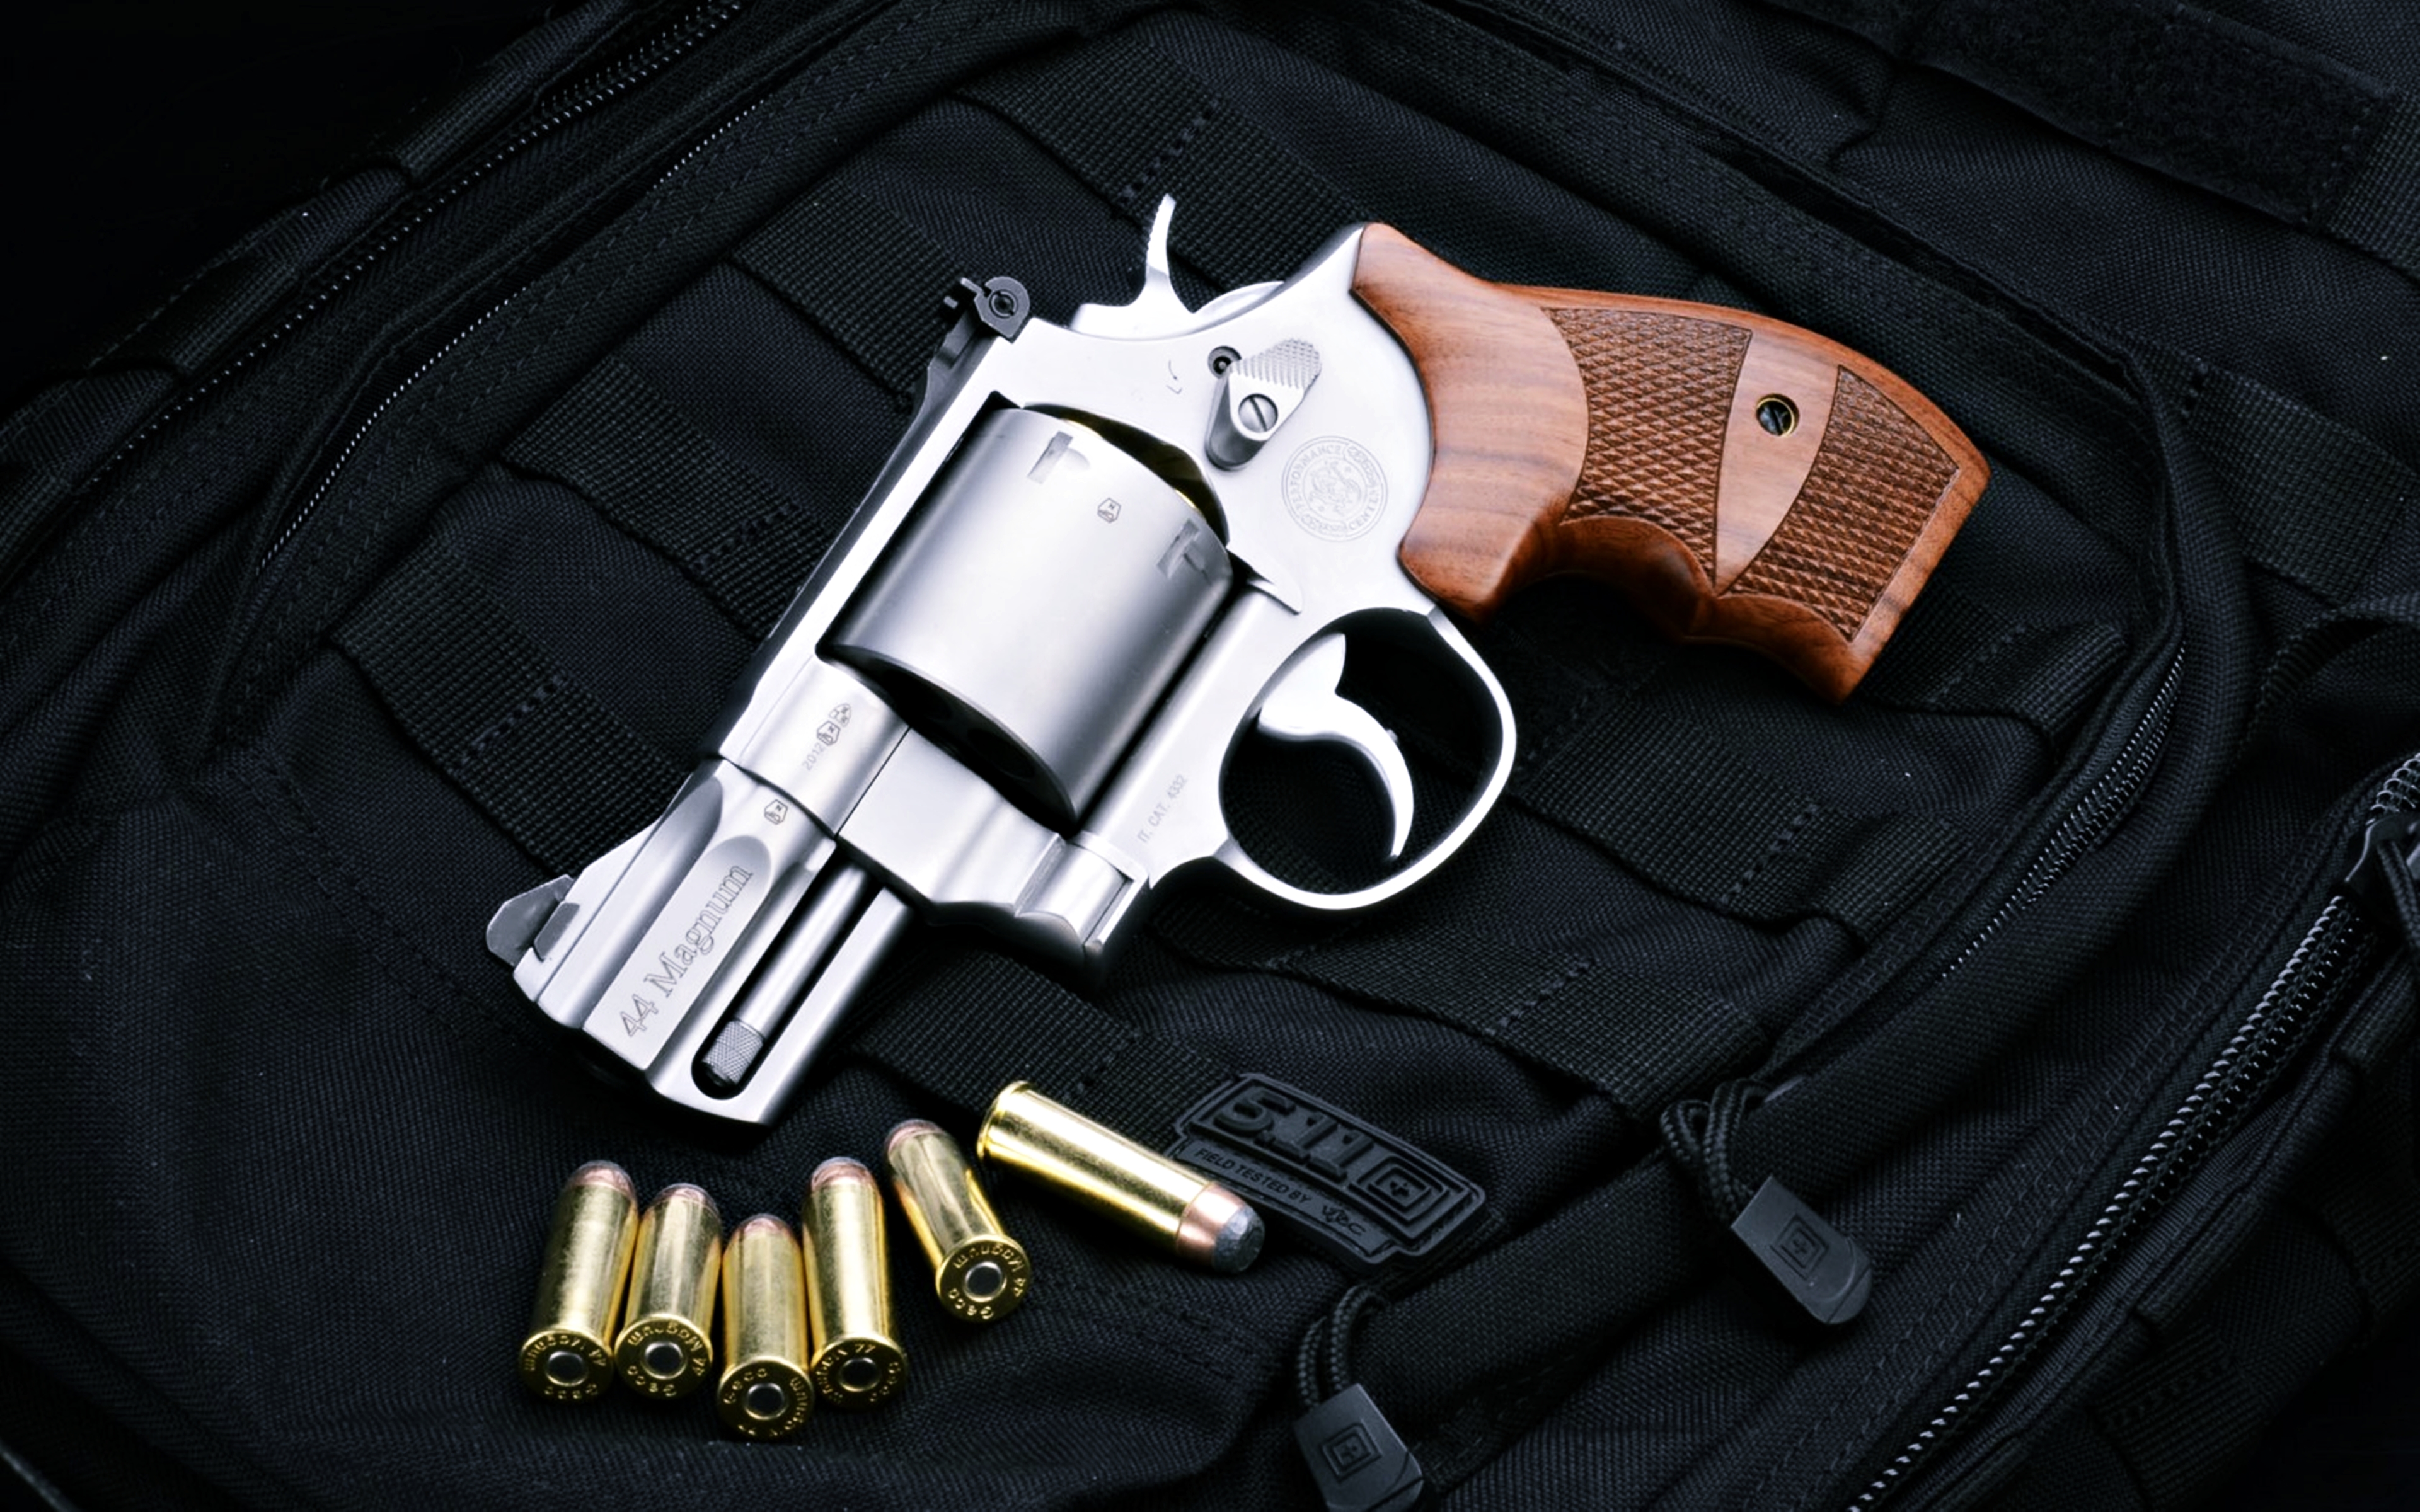 Weapons Smith & Wesson Revolver HD Wallpaper | Background Image